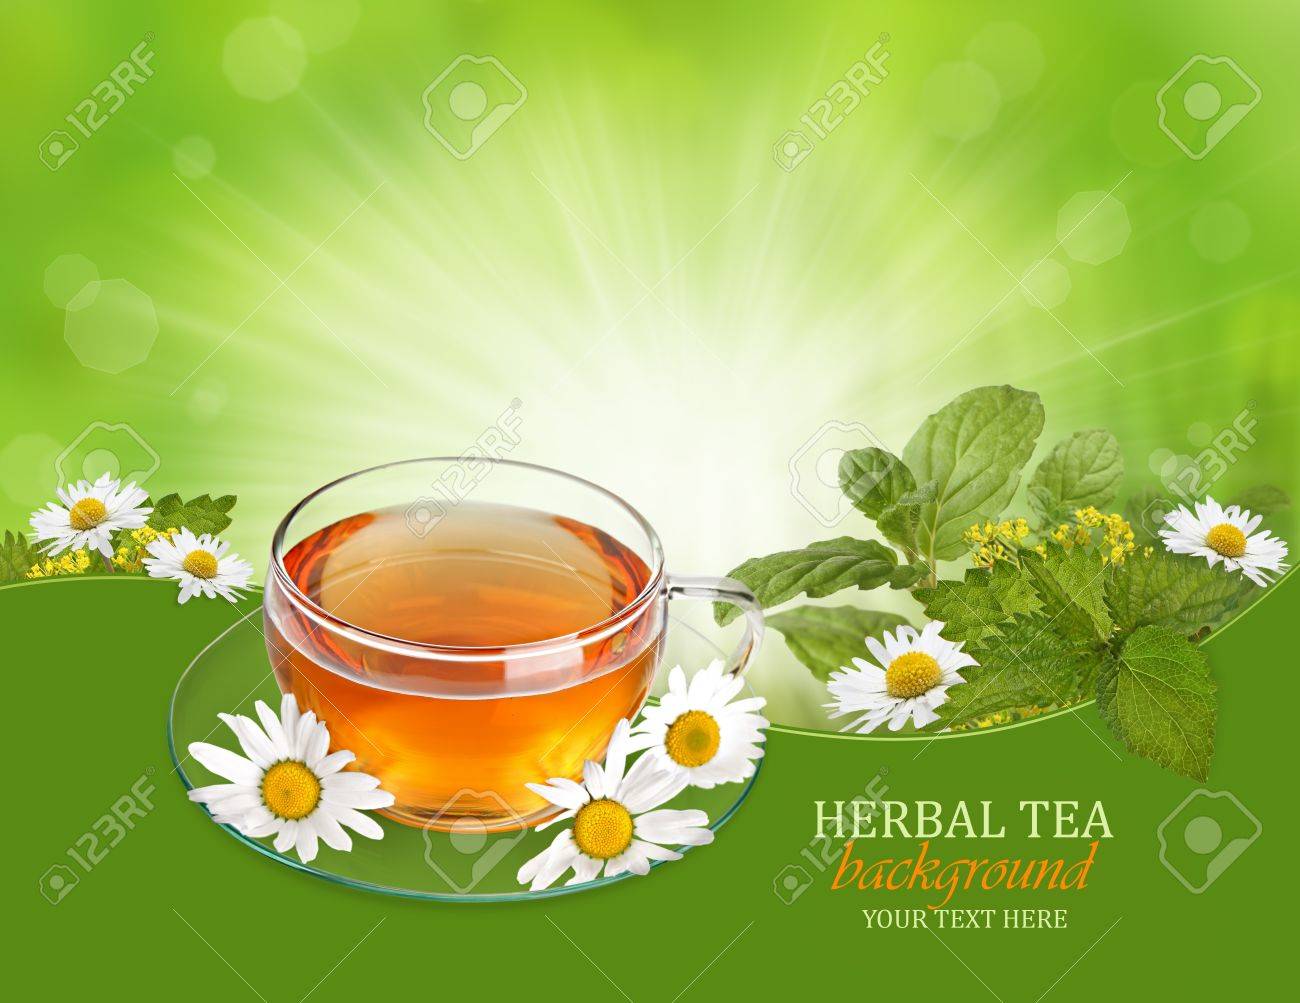 Herbal Tea Background With Herbs And Chamomile Stock Photo